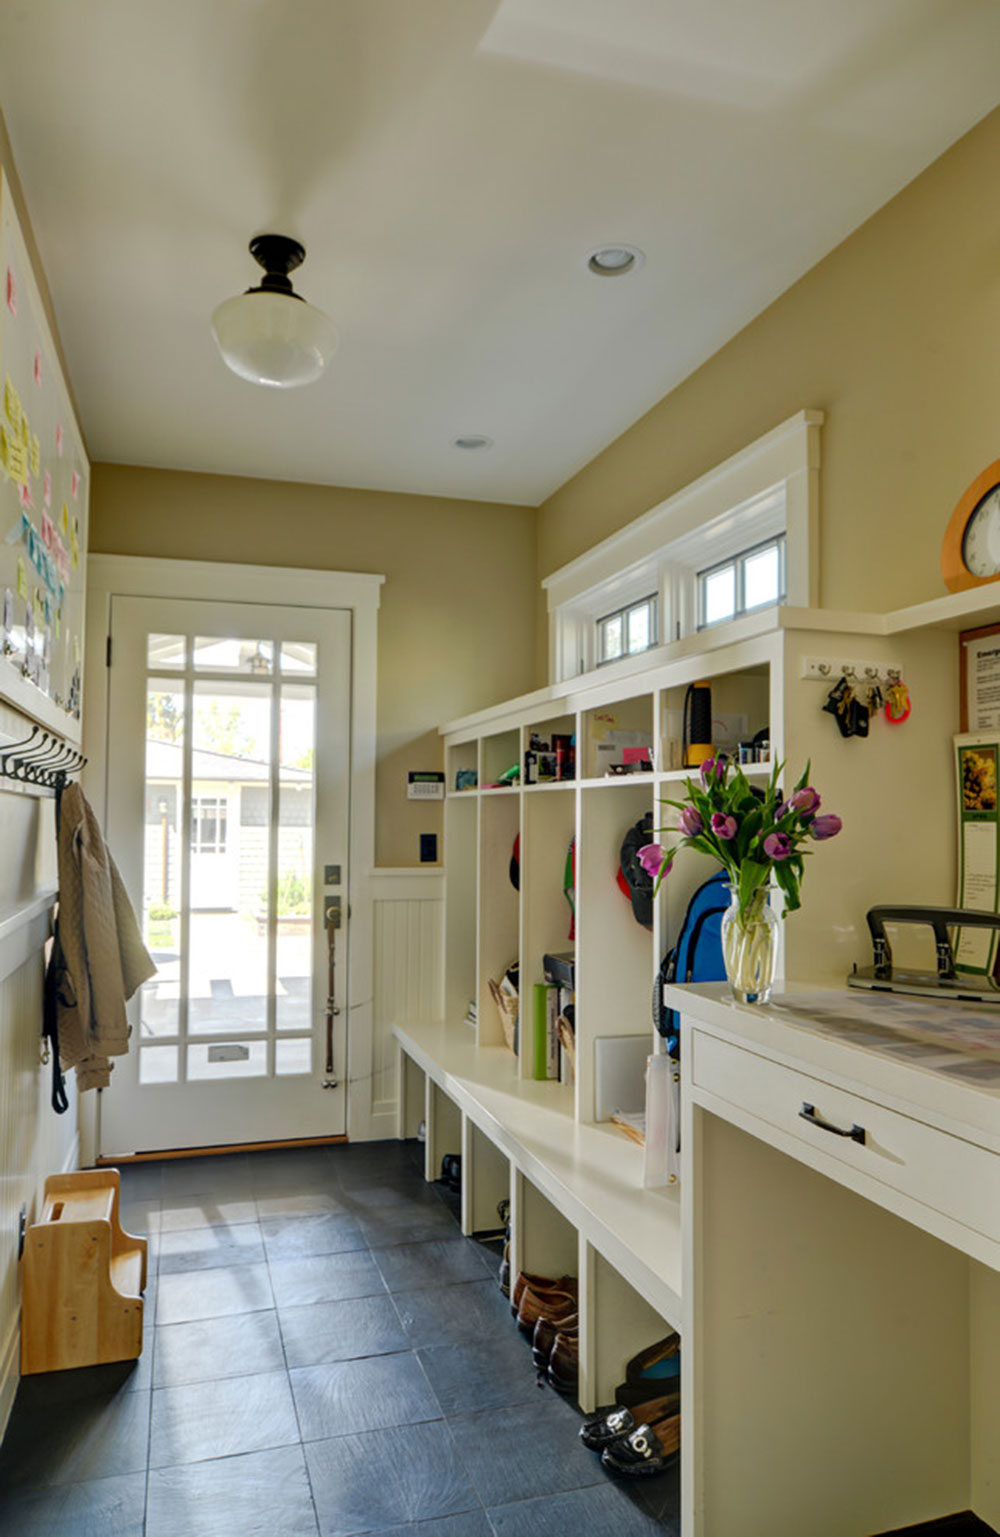 Clean-Your-House-With-These-Mudroom-Plans2 Clean Your House With These Mudroom Plans